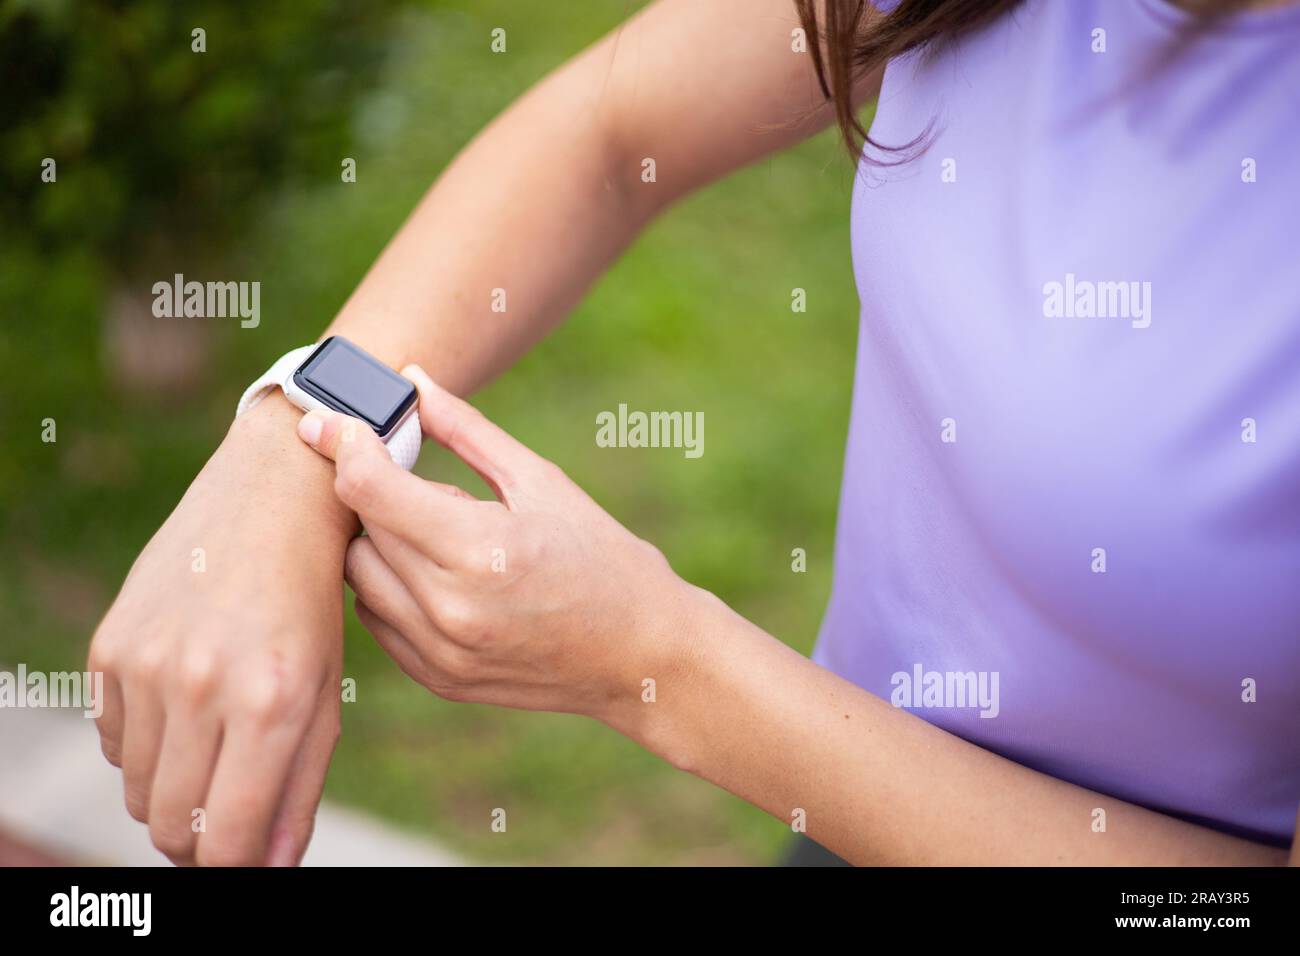 Young woman checking a sport smartwatch after running outdoors. Female with fitness tracker watch to monitor training in an urban park. Stock Photo